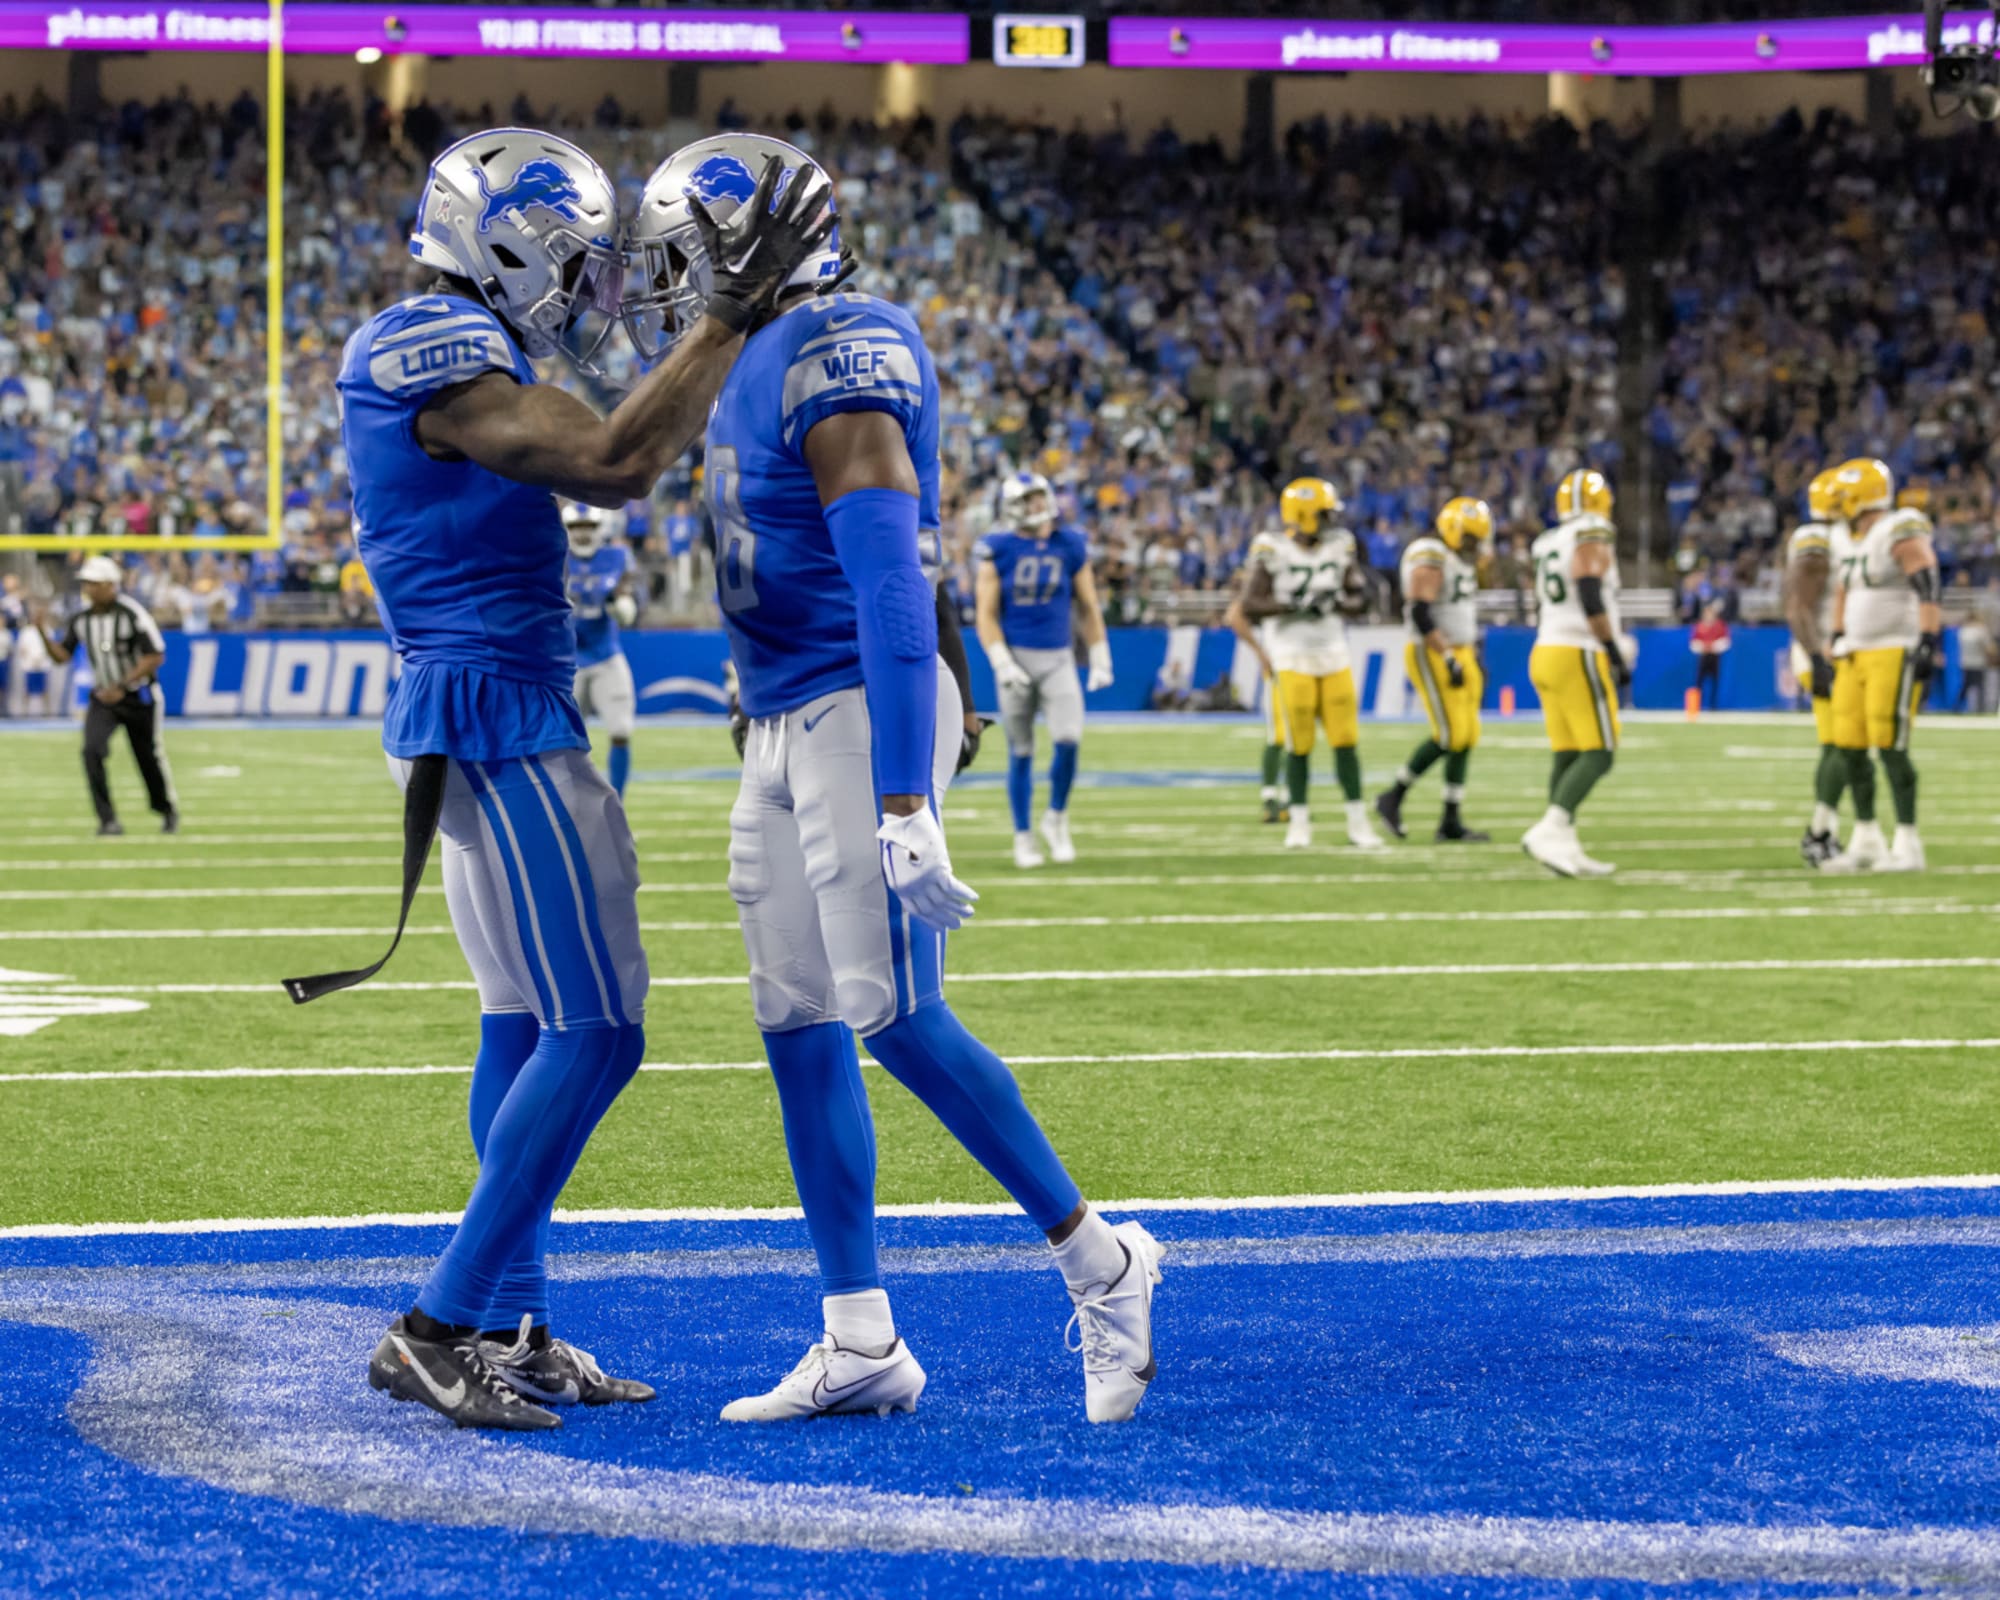 Lions safety takes shot at Aaron Rodgers ahead of potential play-in matchup (Video)